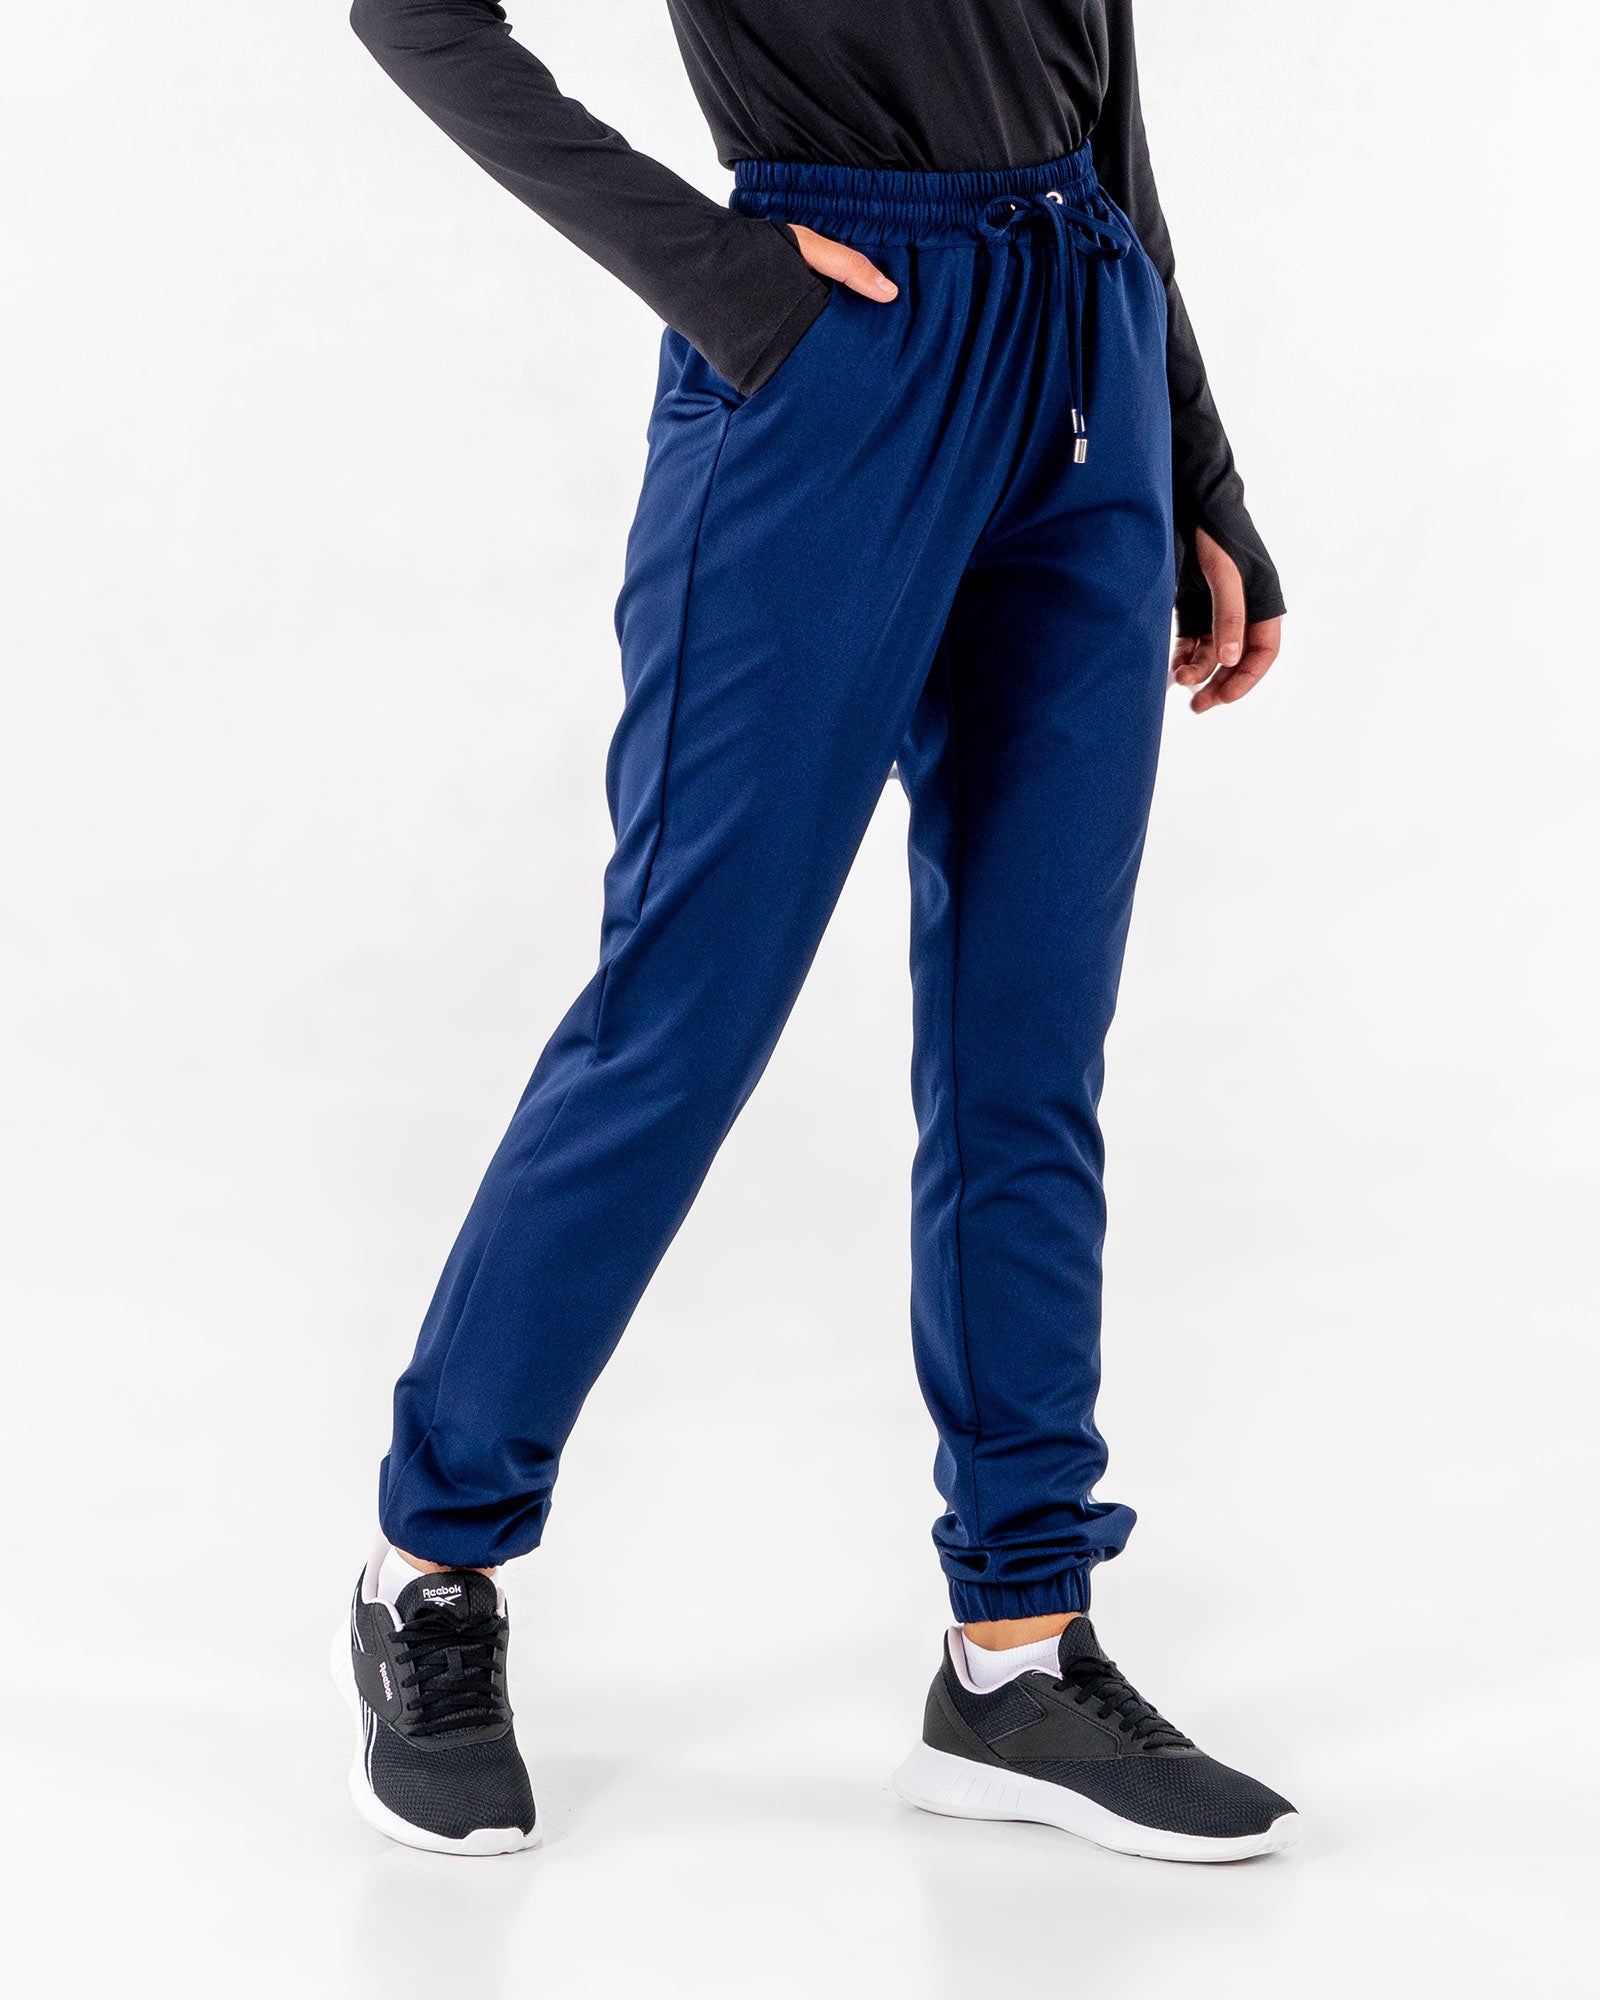 Glider Drawstring Jogger in dark blue by Veil Garments. Modest activewear collection.